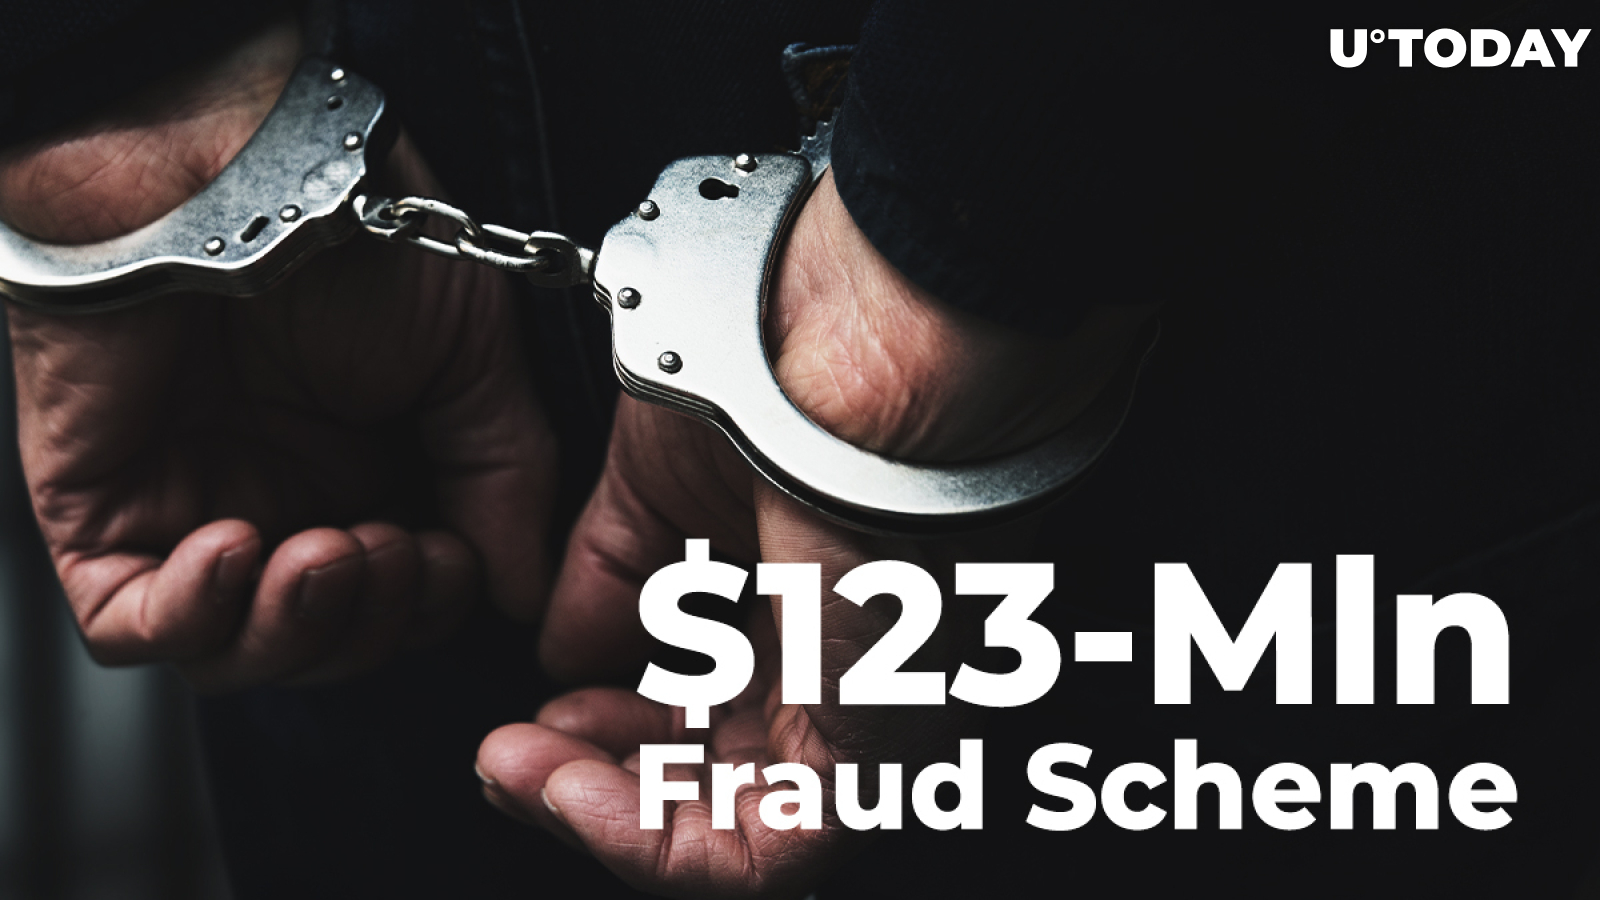 $123 Mln Fraud Scheme Against Investors Gets Cyber Anti-Fraud Firm CEO Arrested